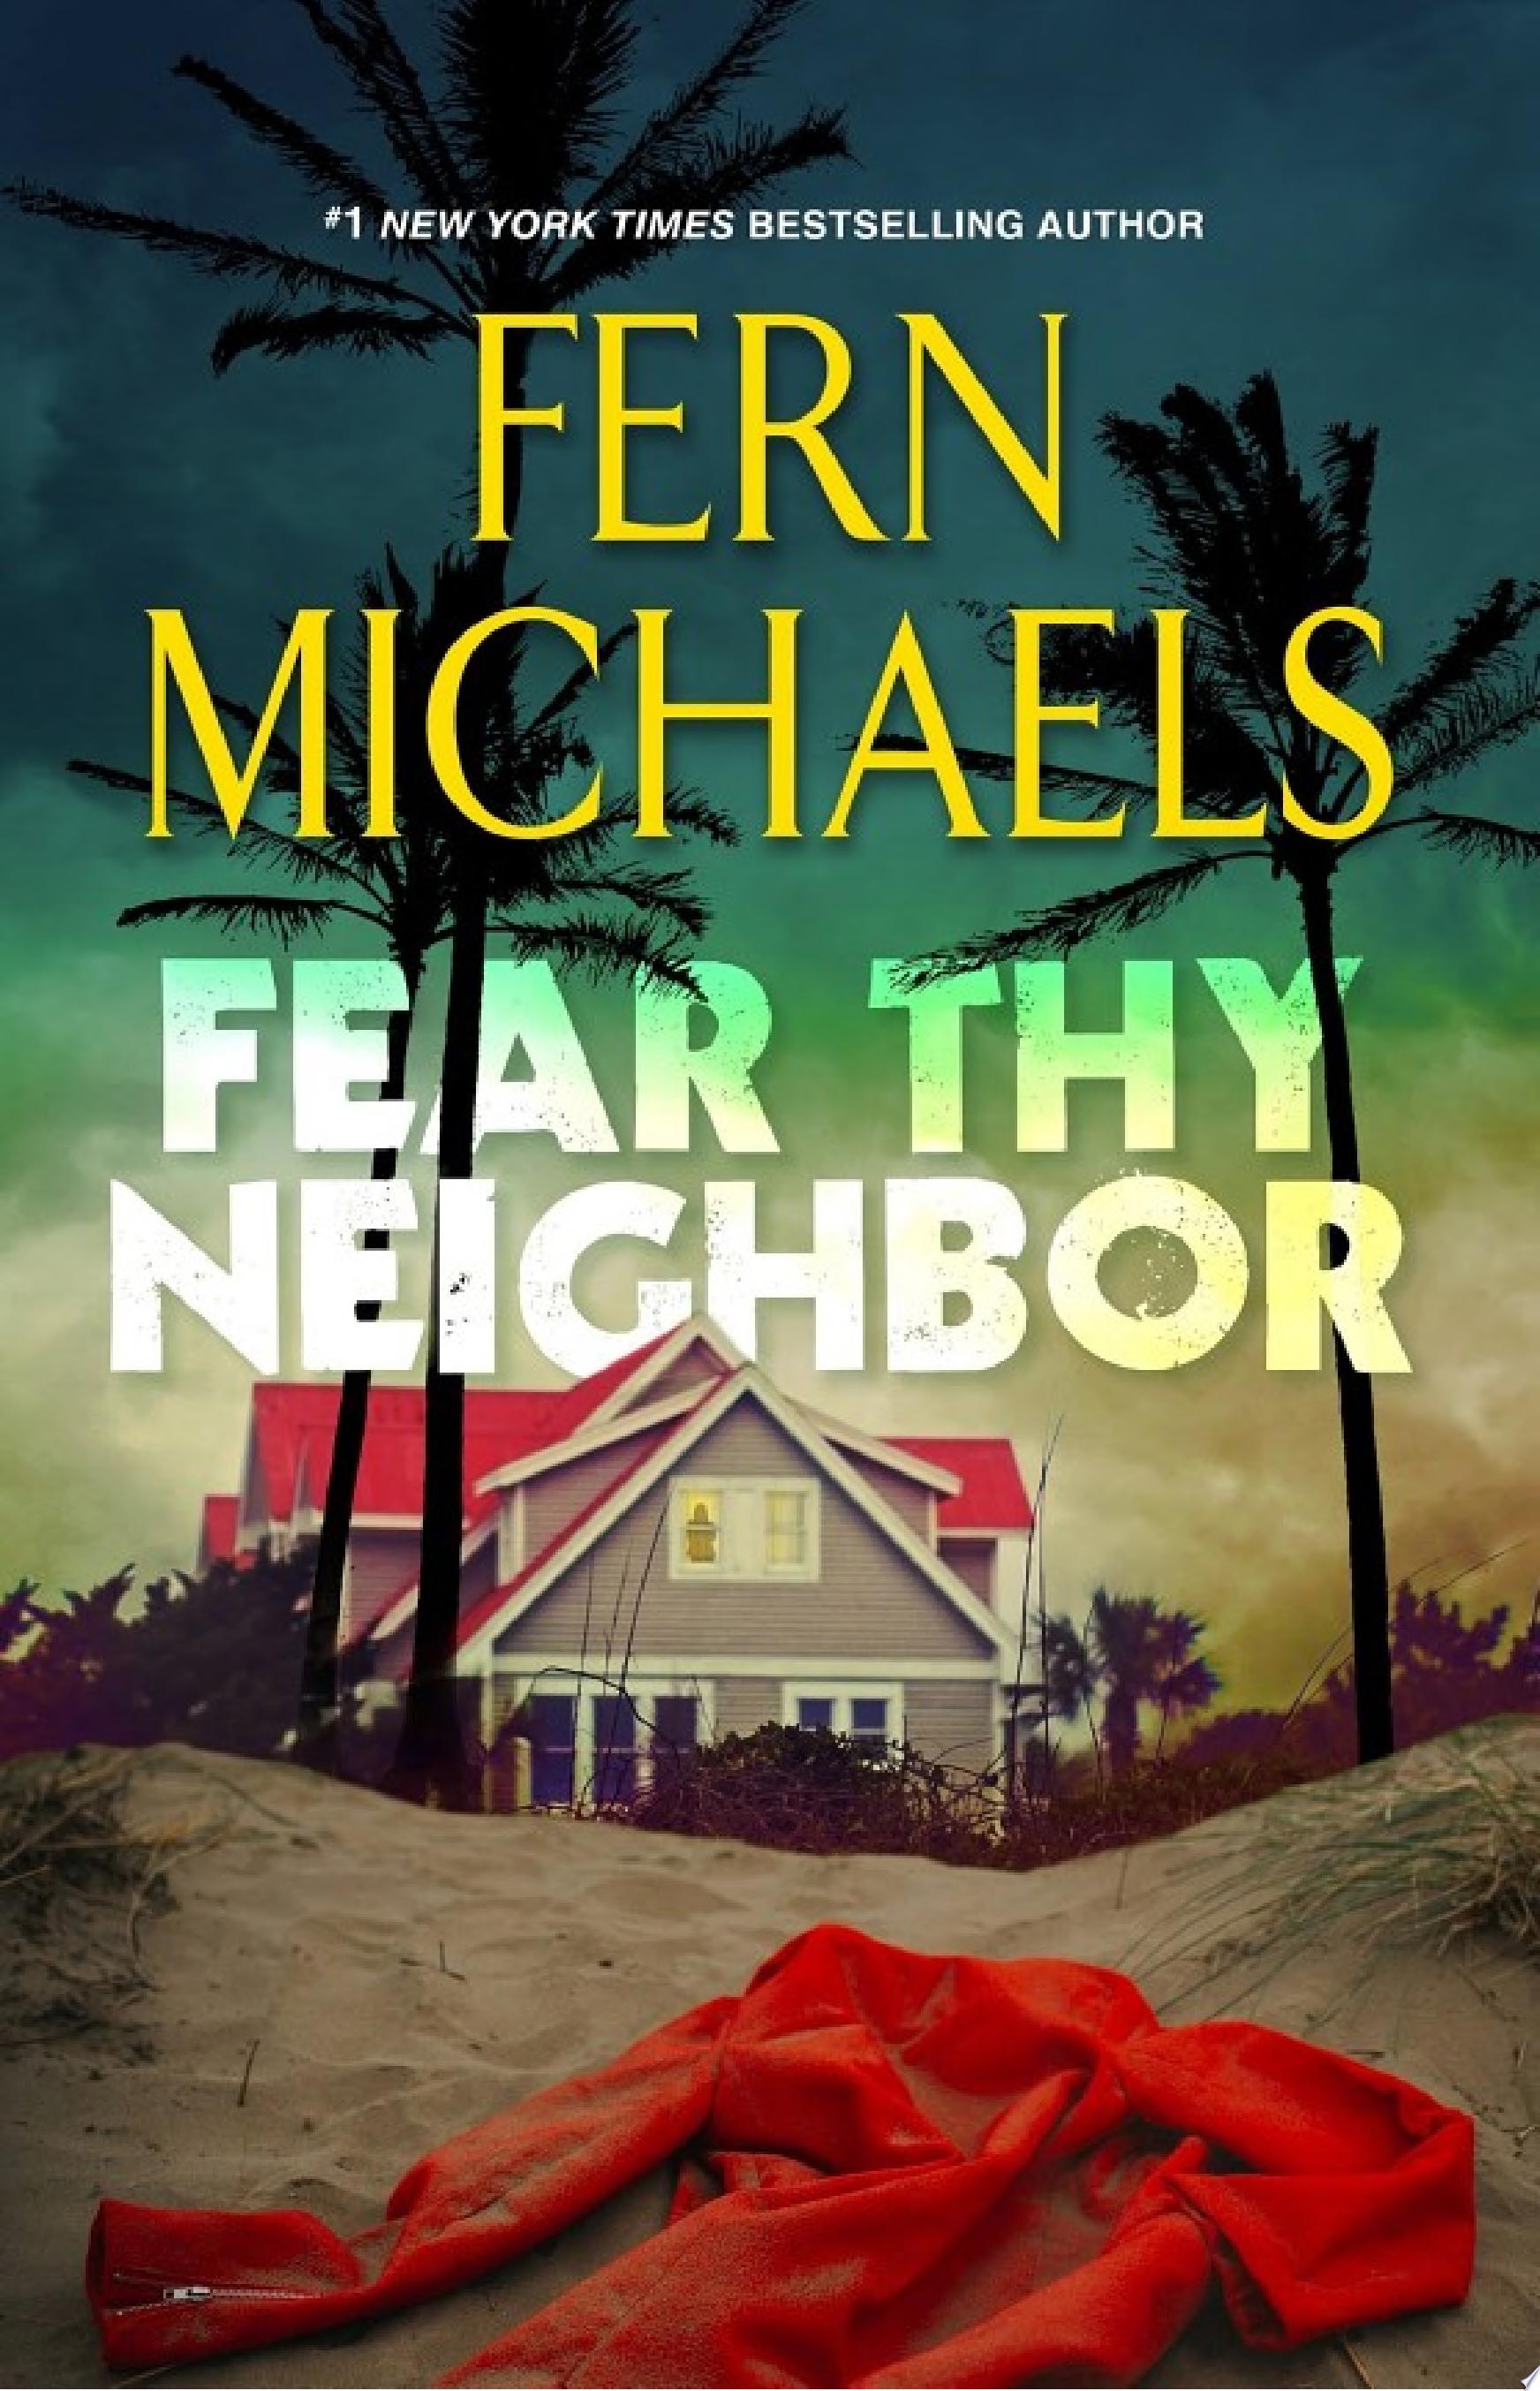 Image for "Fear Thy Neighbor"